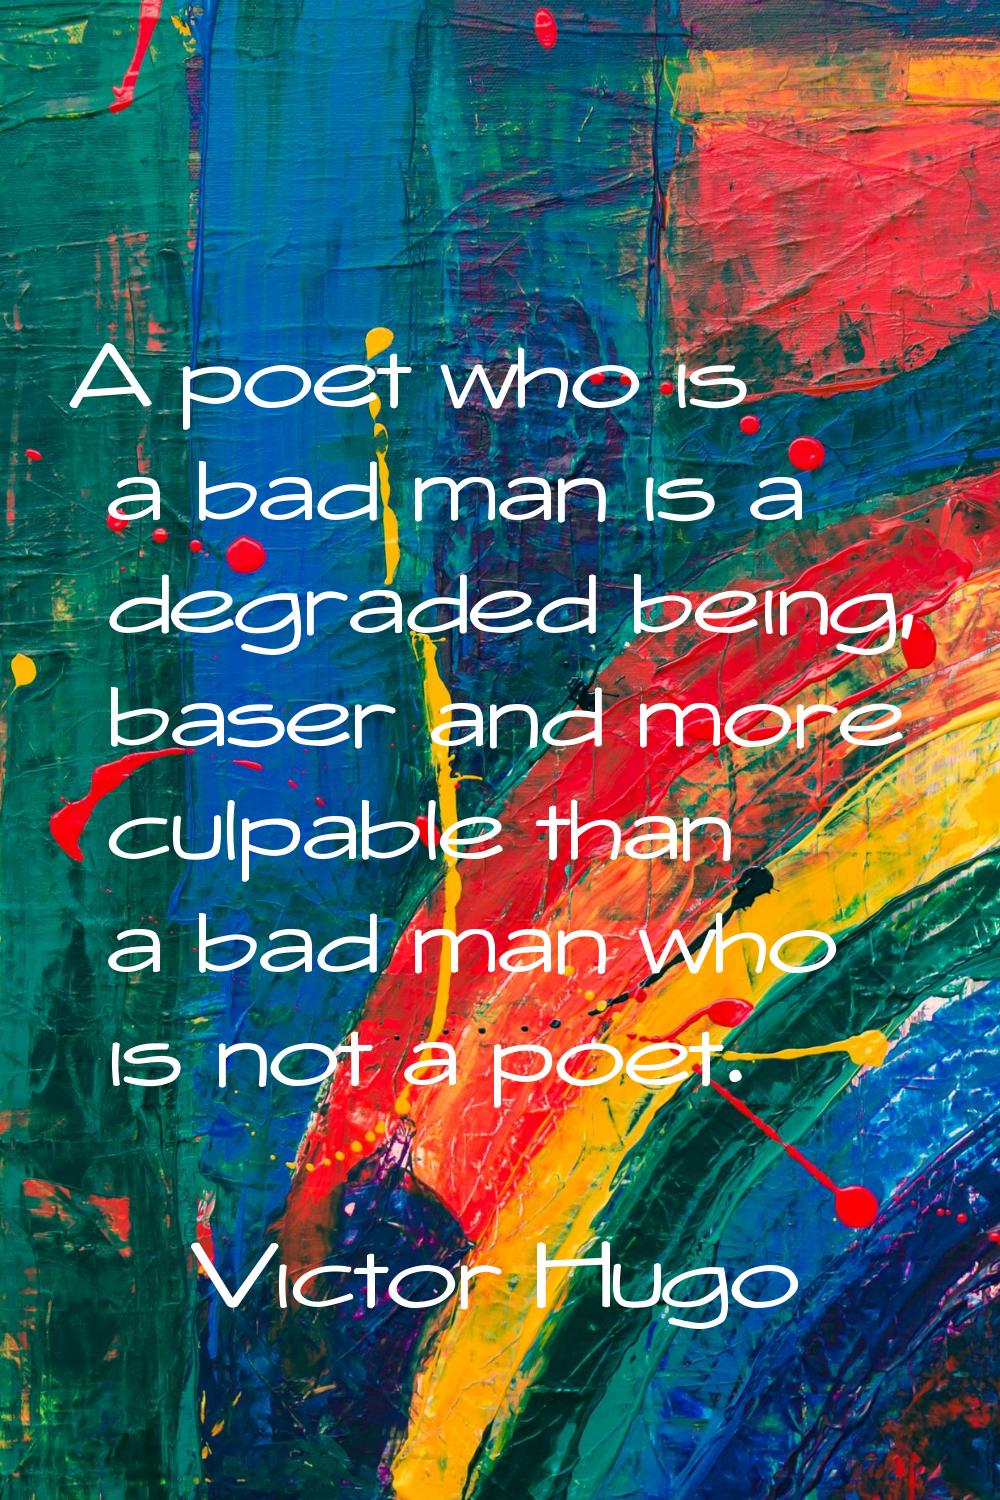 A poet who is a bad man is a degraded being, baser and more culpable than a bad man who is not a po